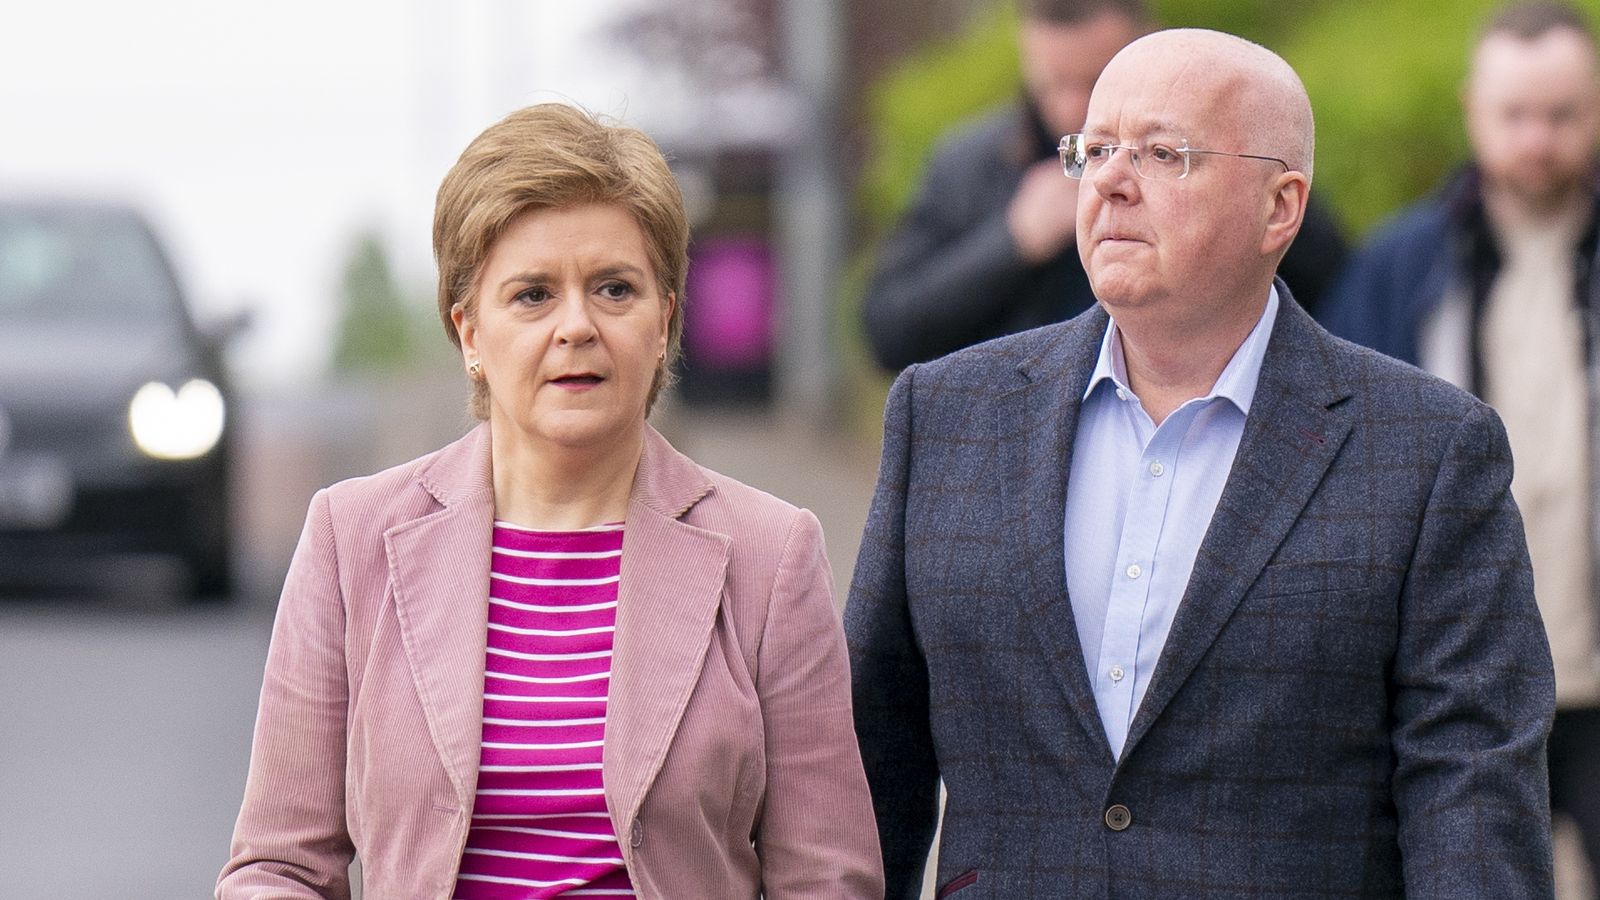 Announce resignation plan or face vote of no confidence, SNP's chief executive told